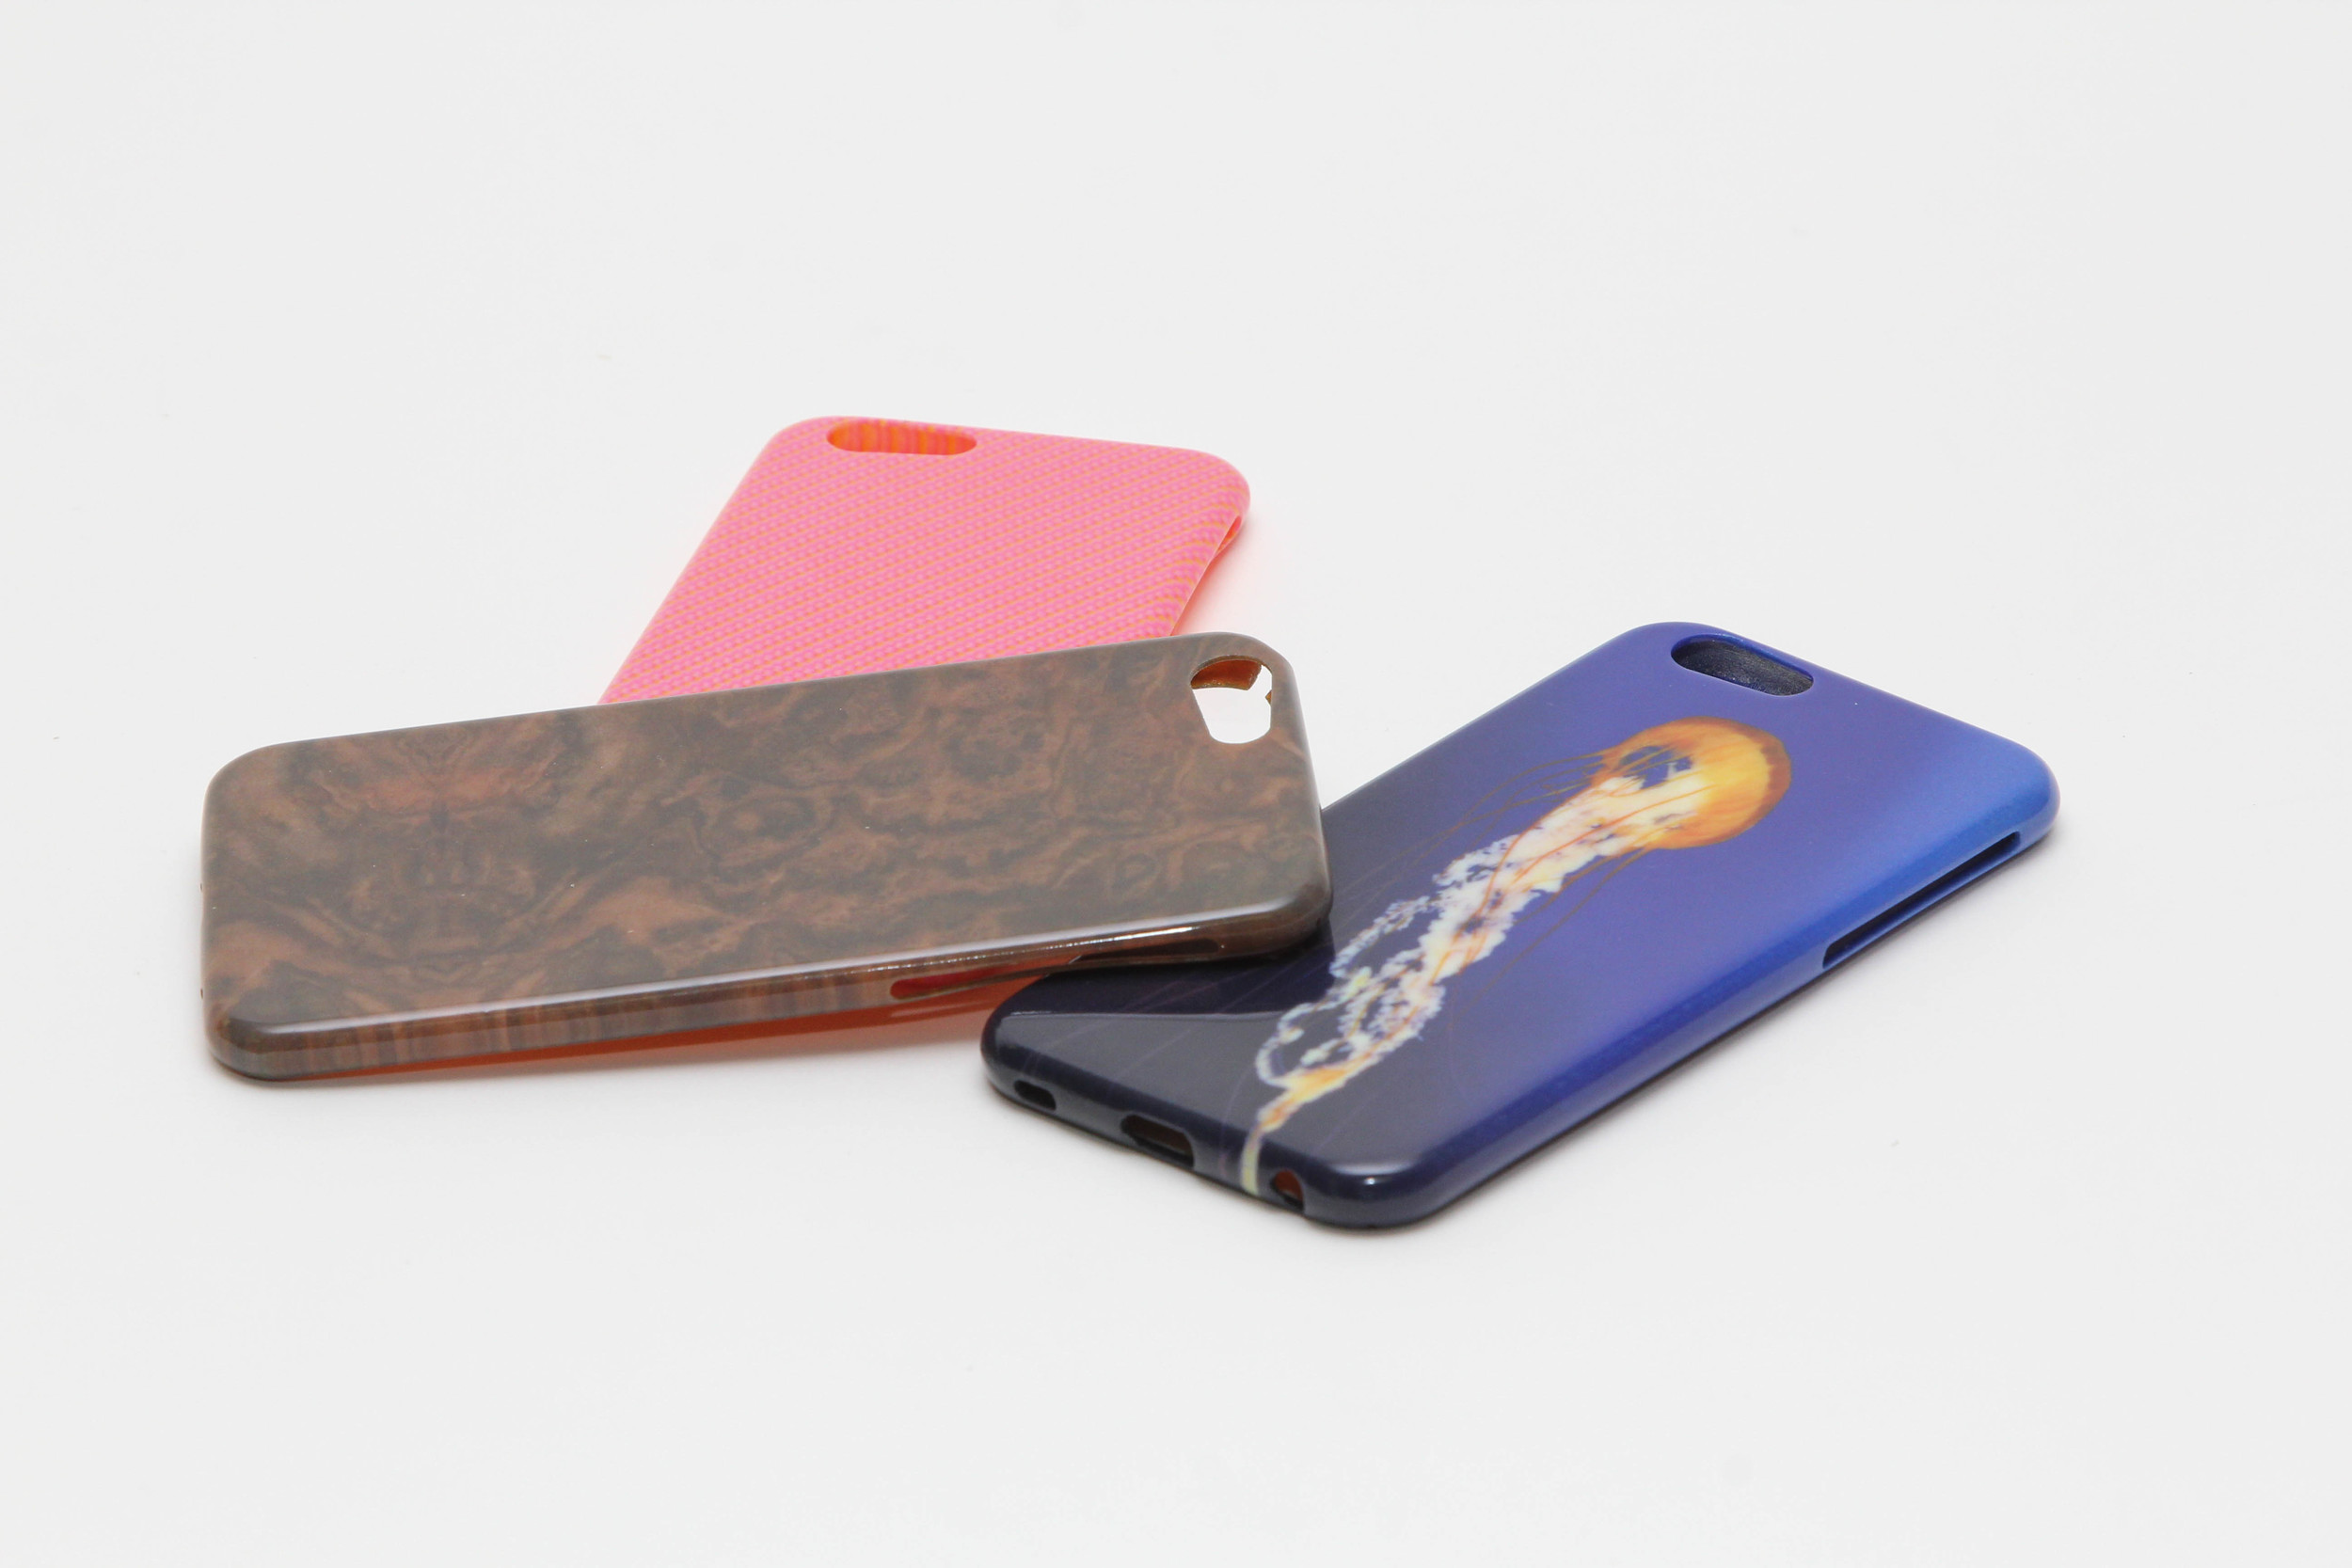  Sample smartphone cases made on Midwest Composite Technologies' full color J750 3D printer 